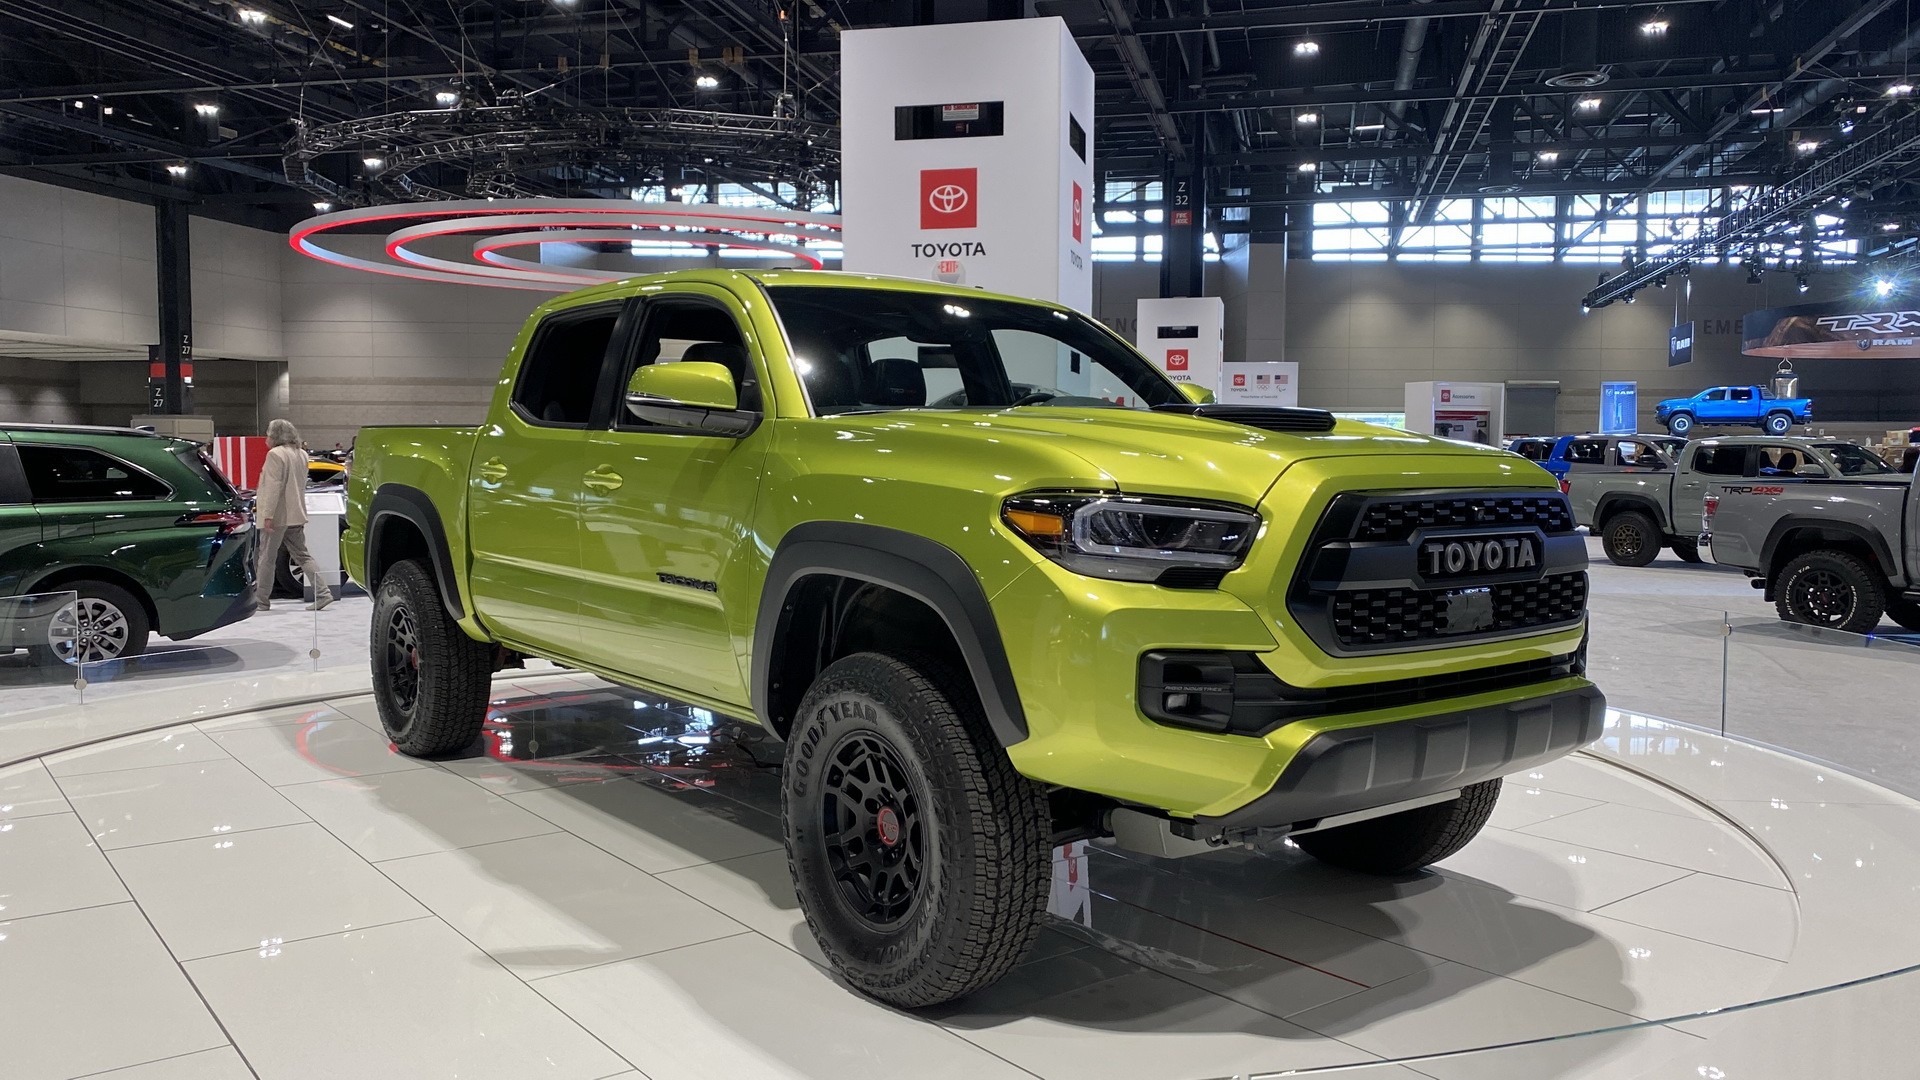 2022 Toyota Tacoma Trd Pro Arrives In Chicago With Electric Lime Green Exterior 1 